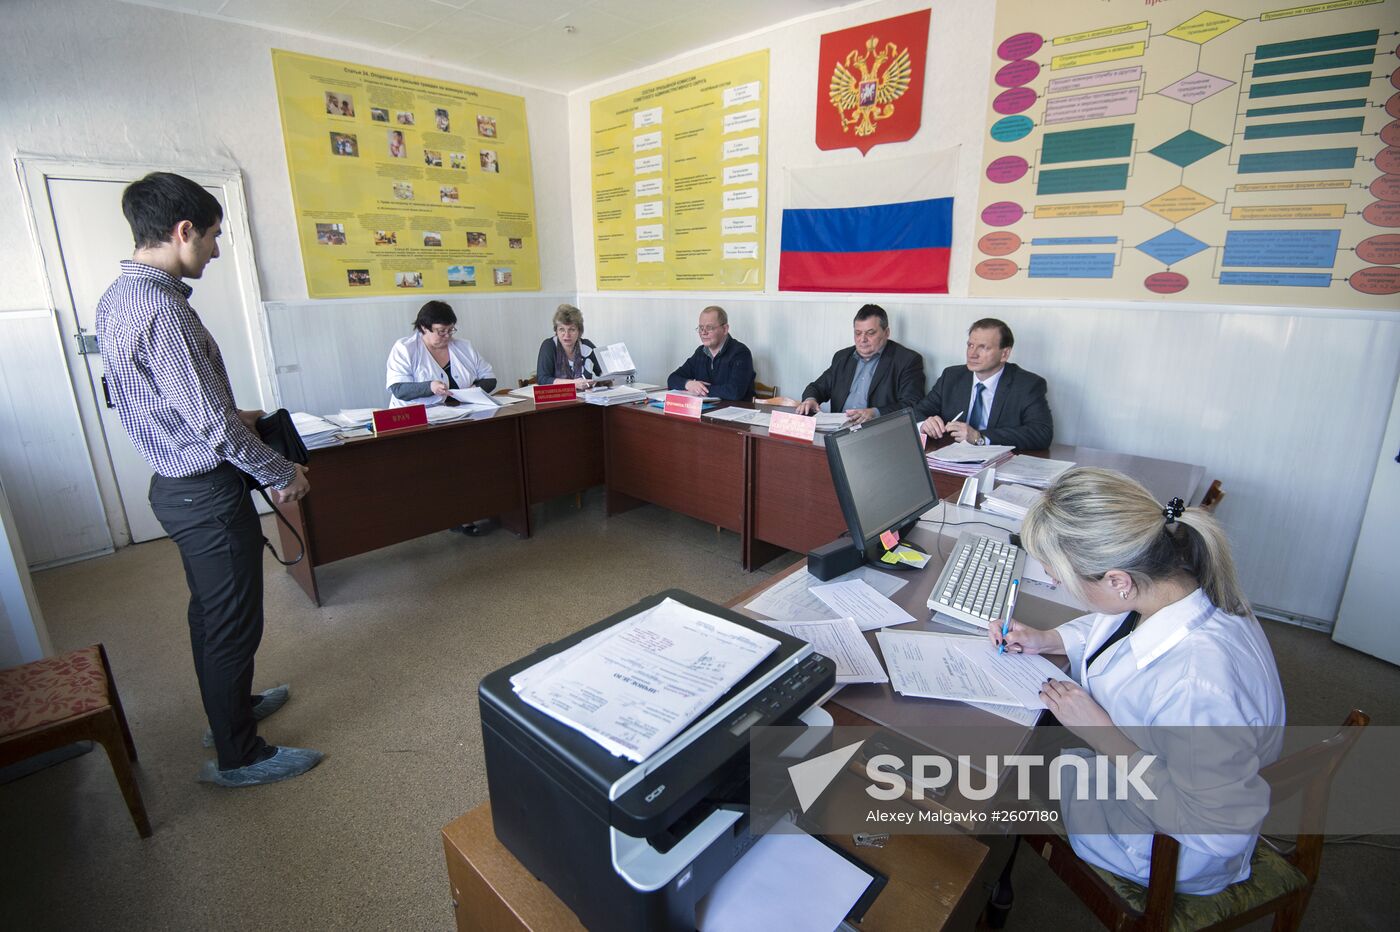 Military enlistment office at work in Omsk